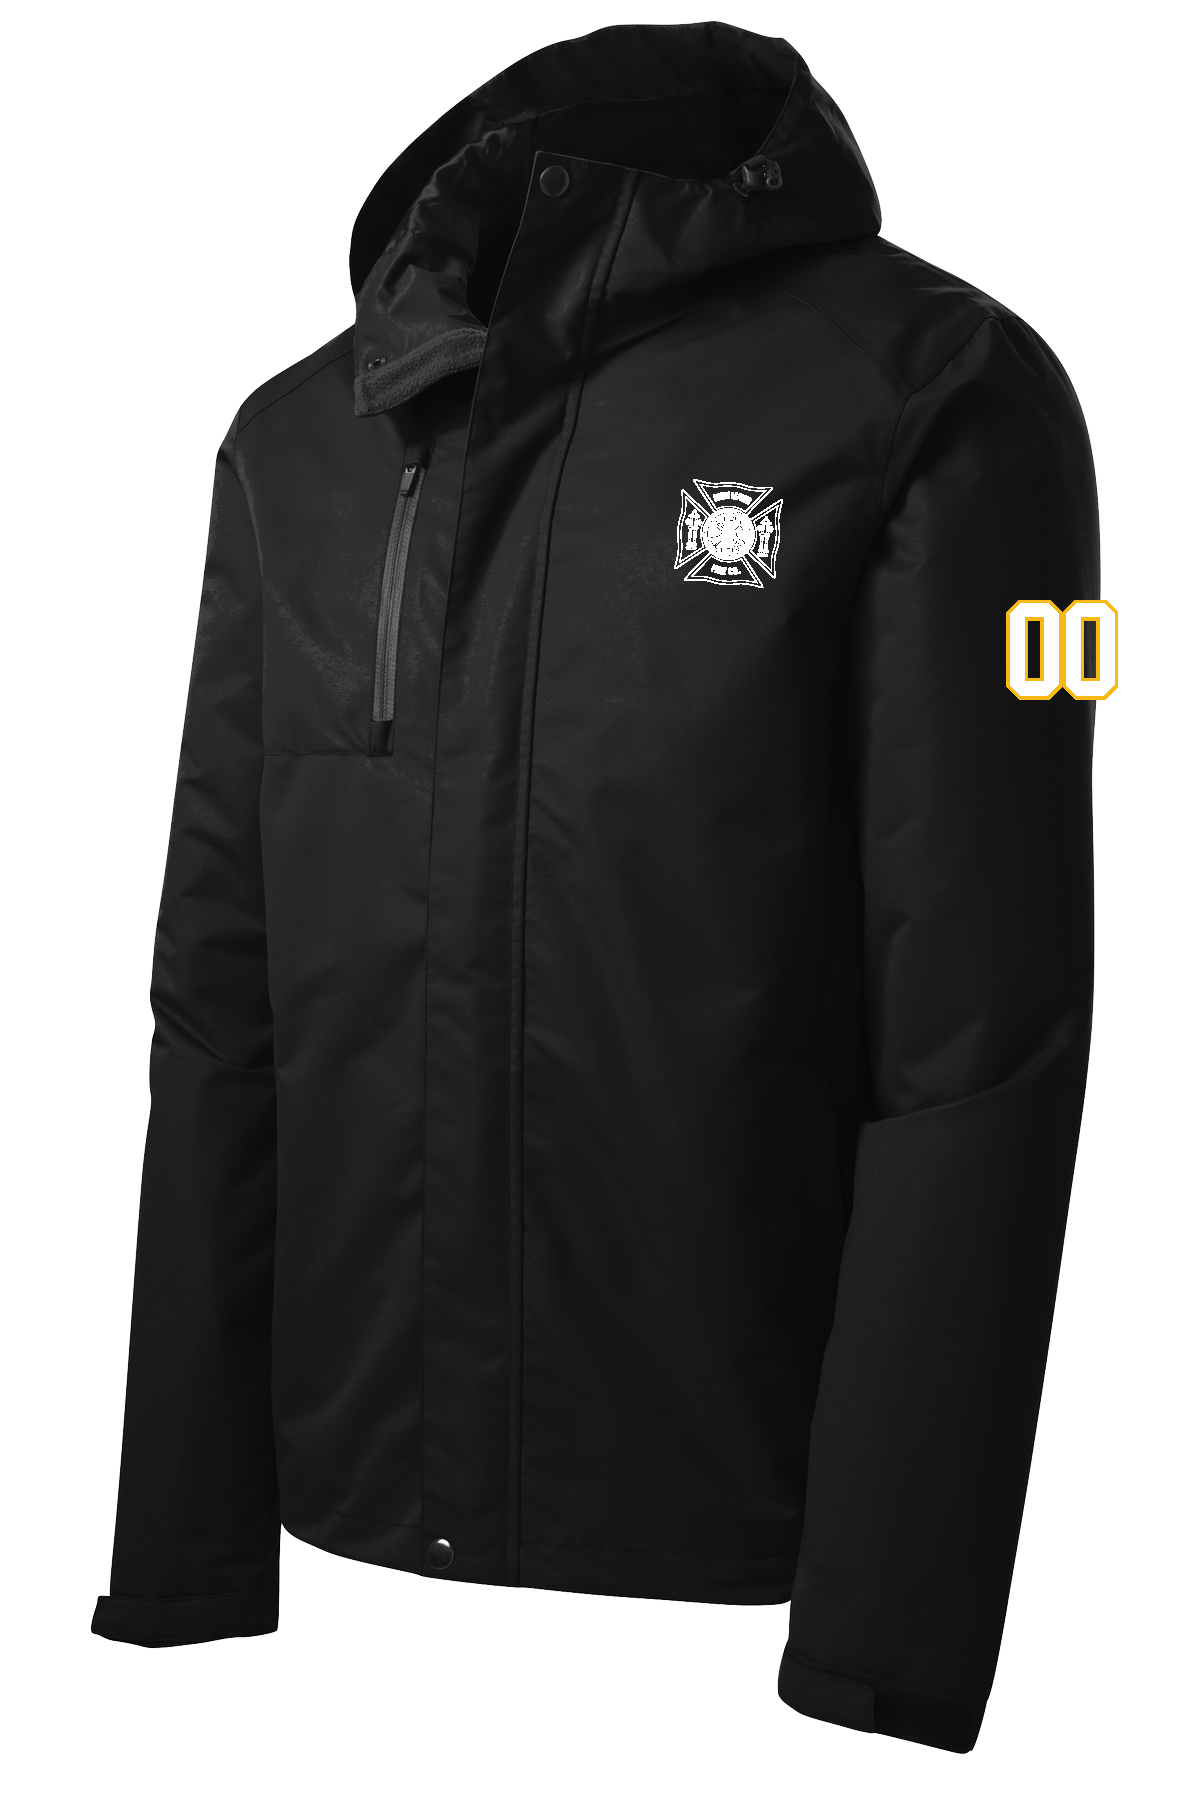 BMFC All-Conditions Jacket -BLACK